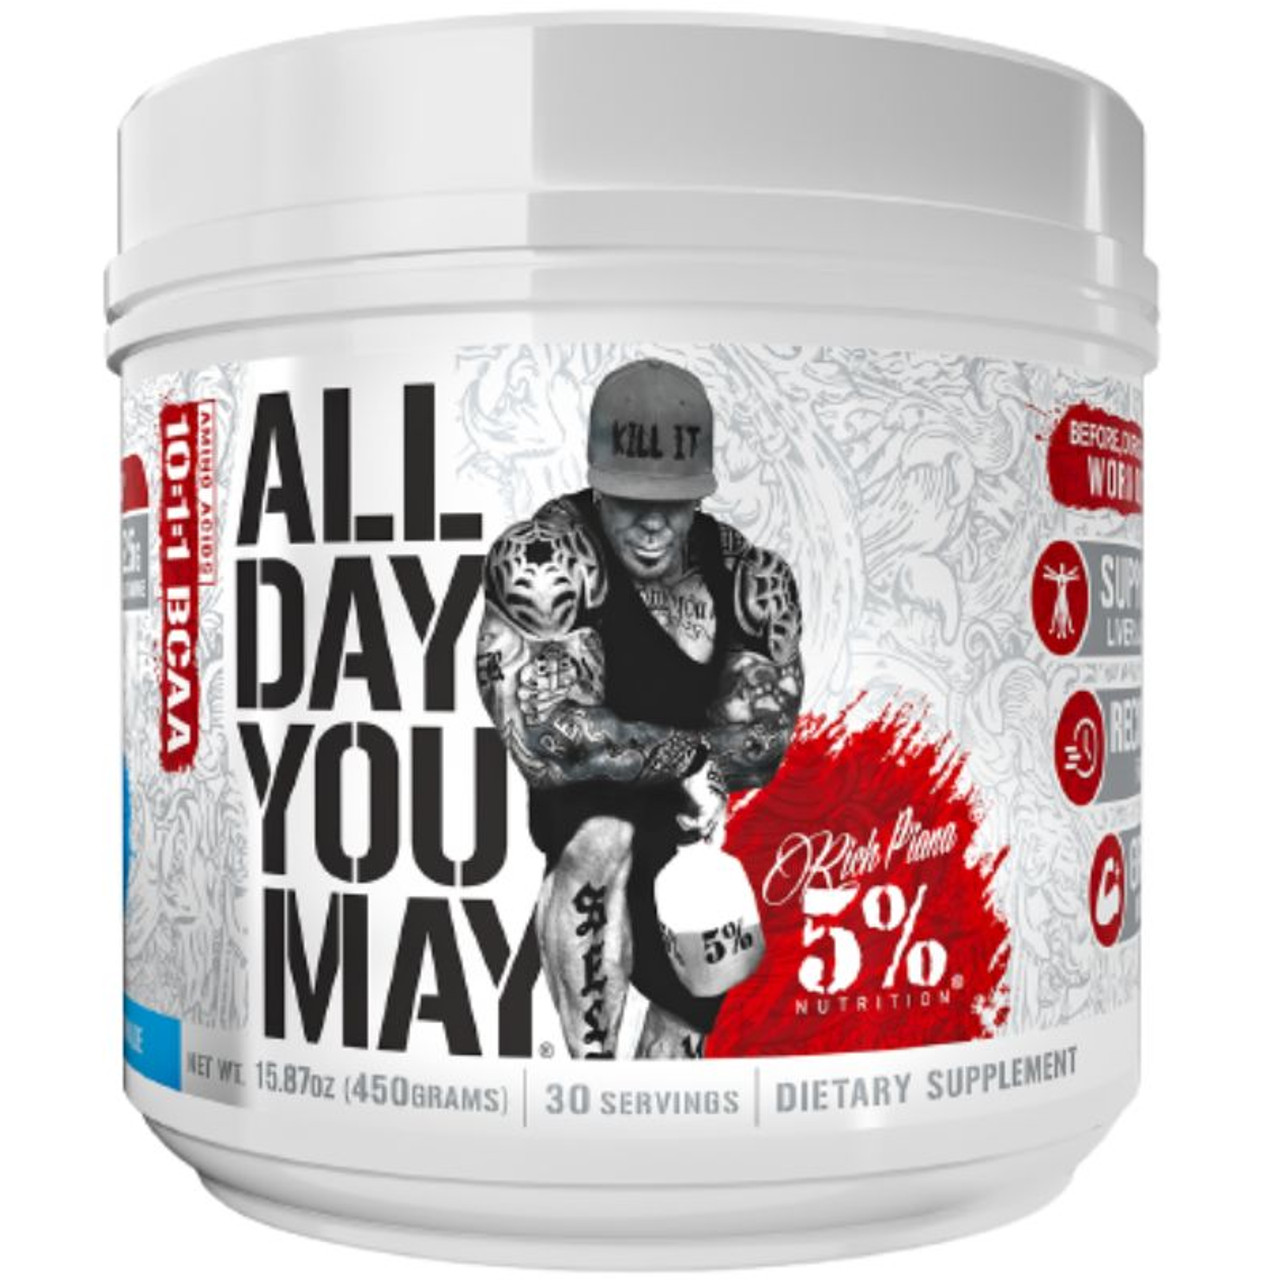 5% Nutrition ALL DAY YOU MAY Blueberry Lemonade -450g